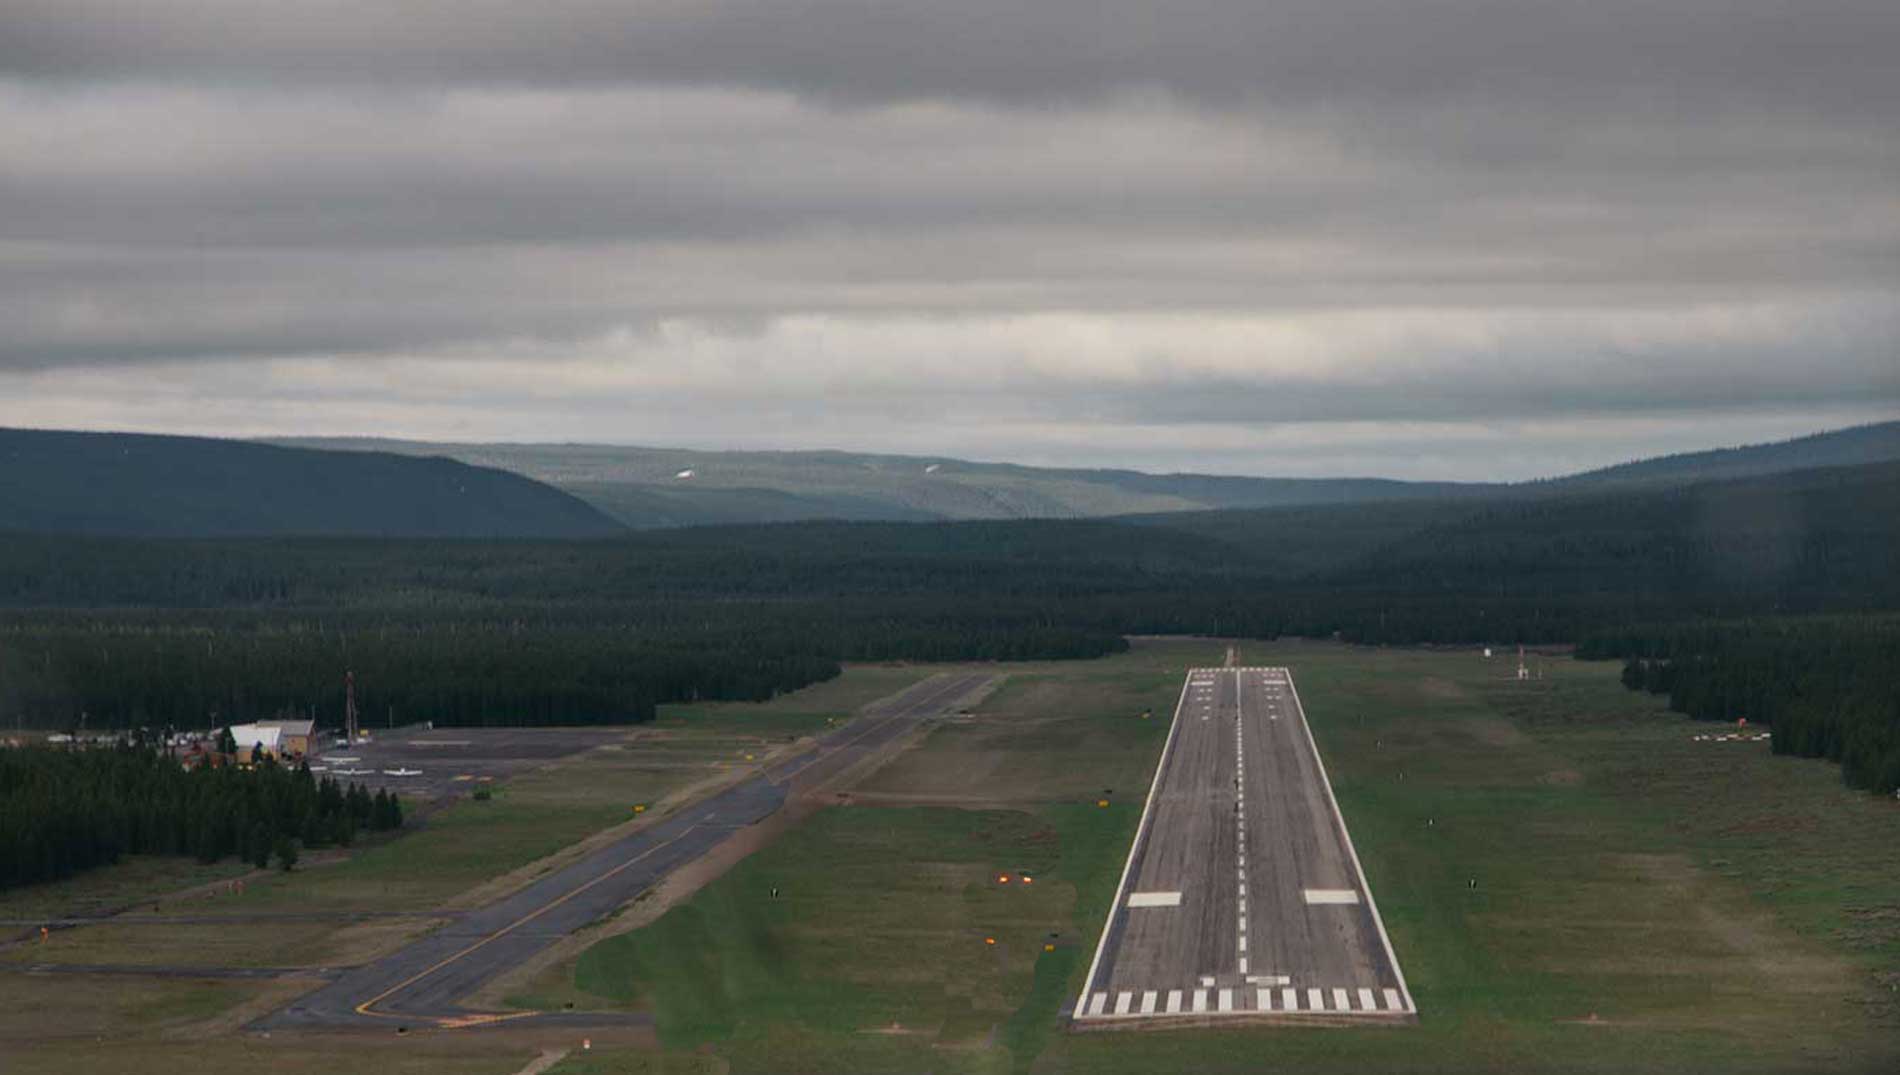 view of the scenic runway from a plane about to land